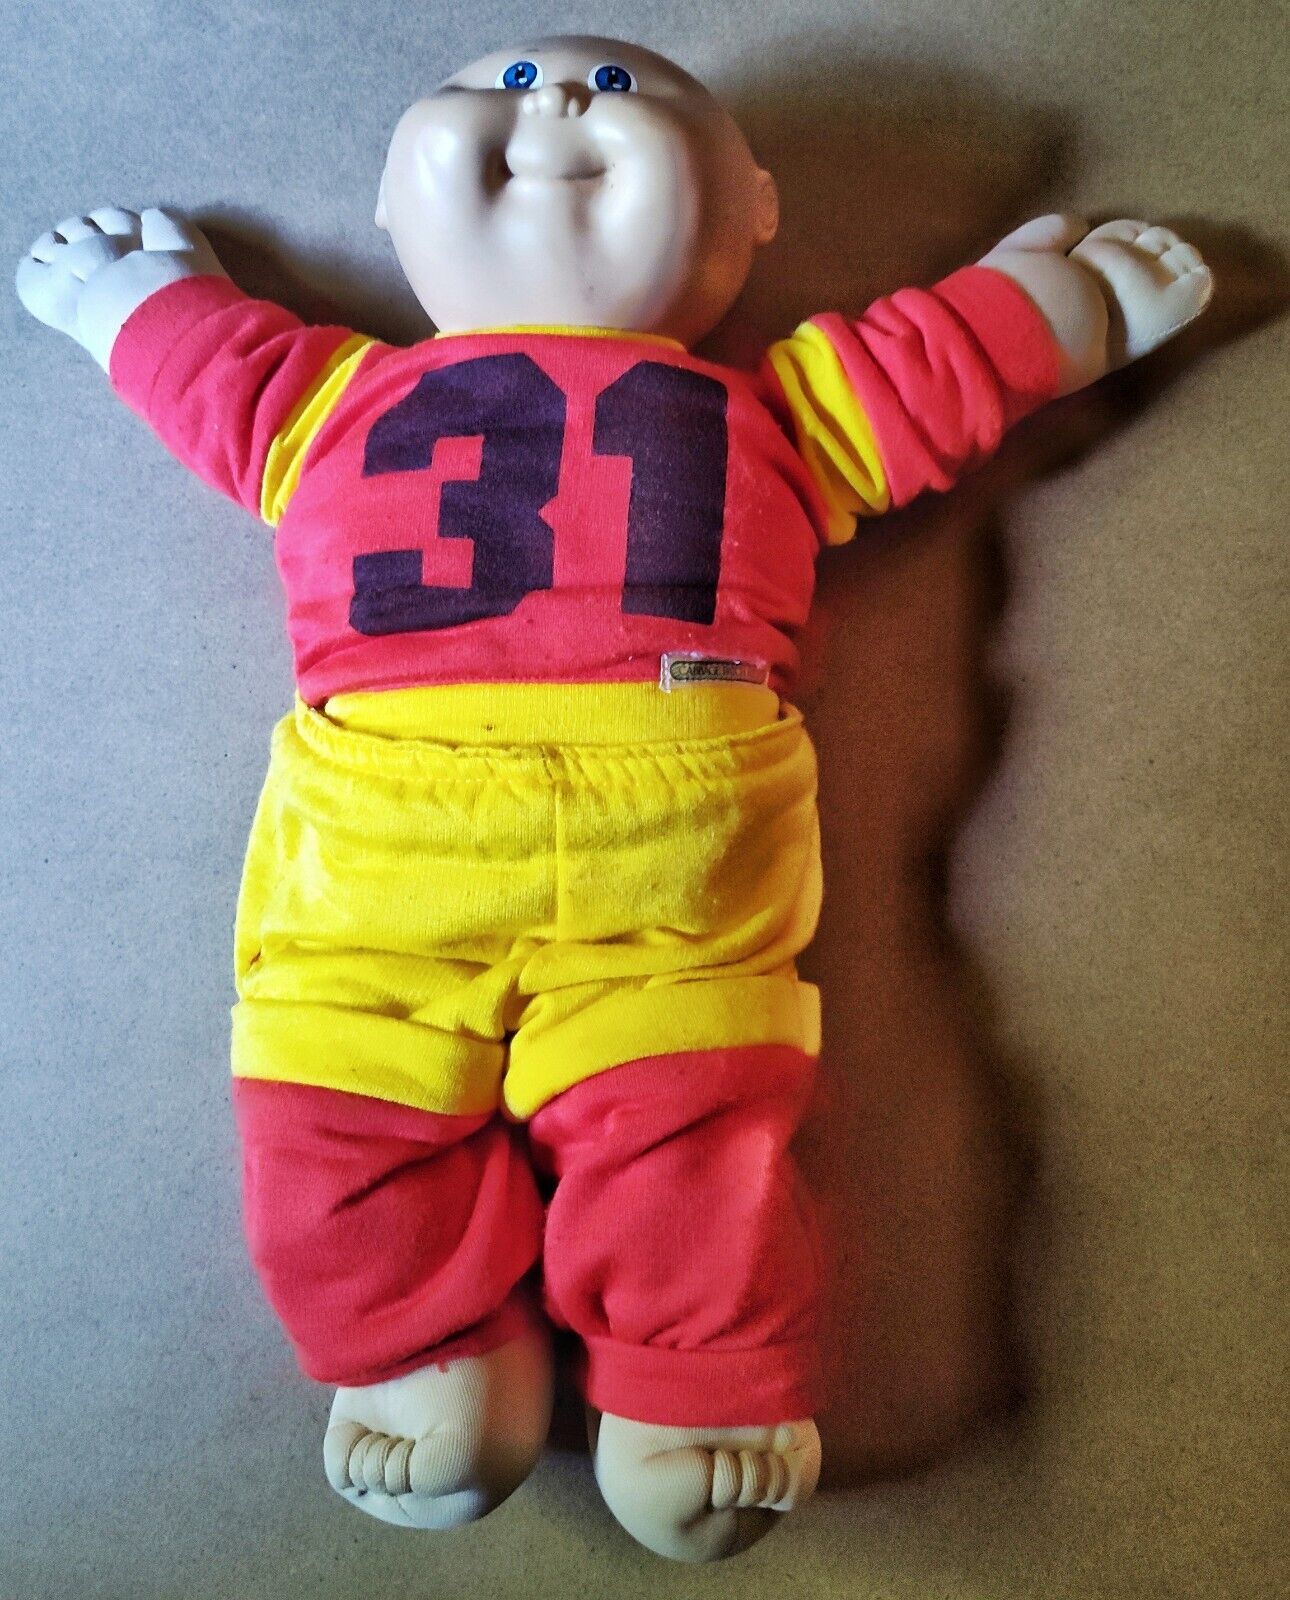 Vintage 1982 Cabbage Patch Kids Doll #31 Red & Yellow Sweatsuit, Bald, Blue Eyes